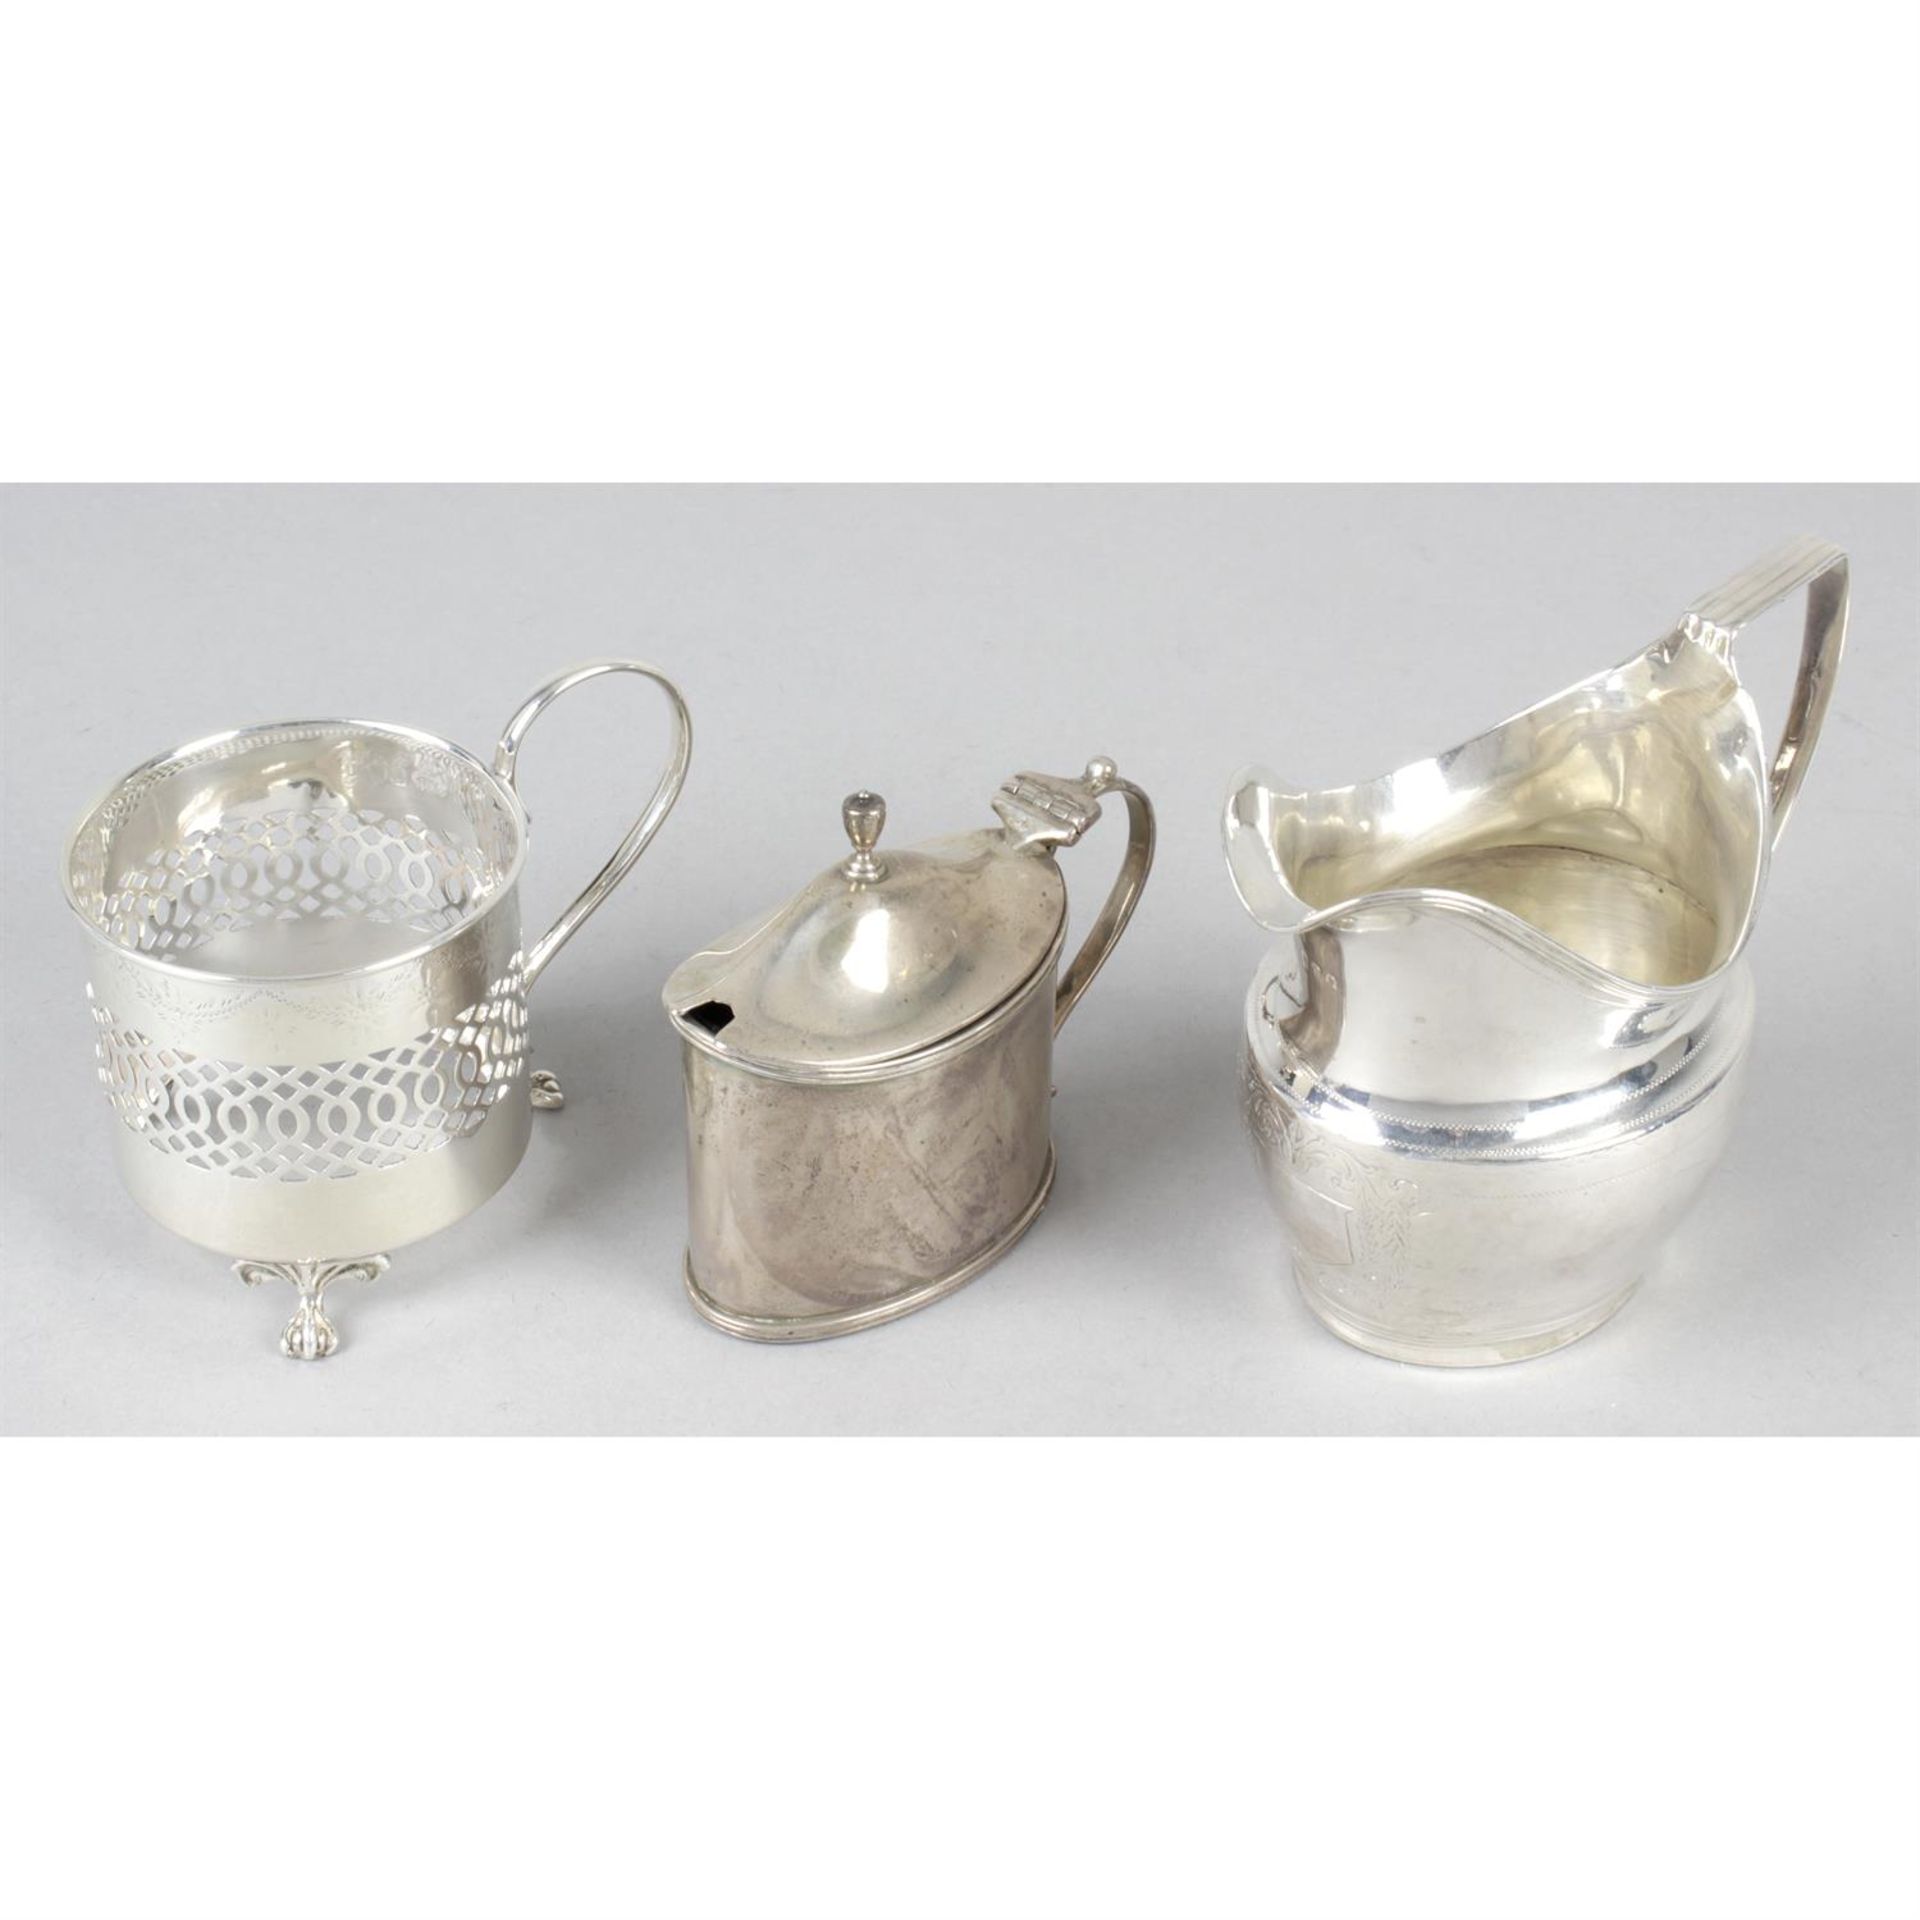 A George III silver cream jug, together with a late Victorian silver mustard pot and a 1920's